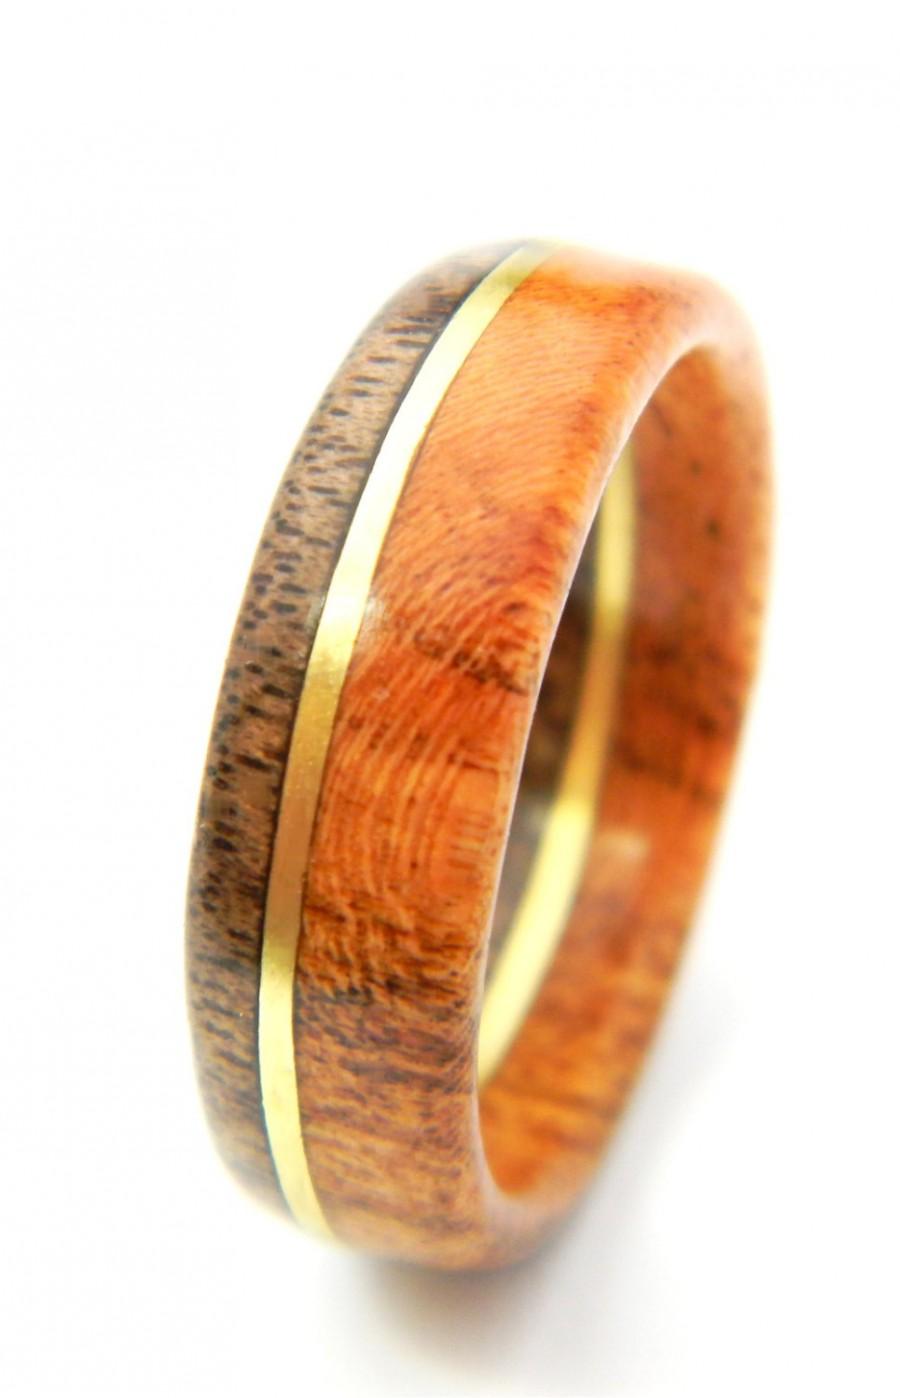 Wedding - Unique Walnut and Cherry Wood Ring, Jewelry, Ring, Wood Jewelry, Weddings, Wedding Band, Engagement Ring, Spring, Him, Men, Gift, Mens Gift